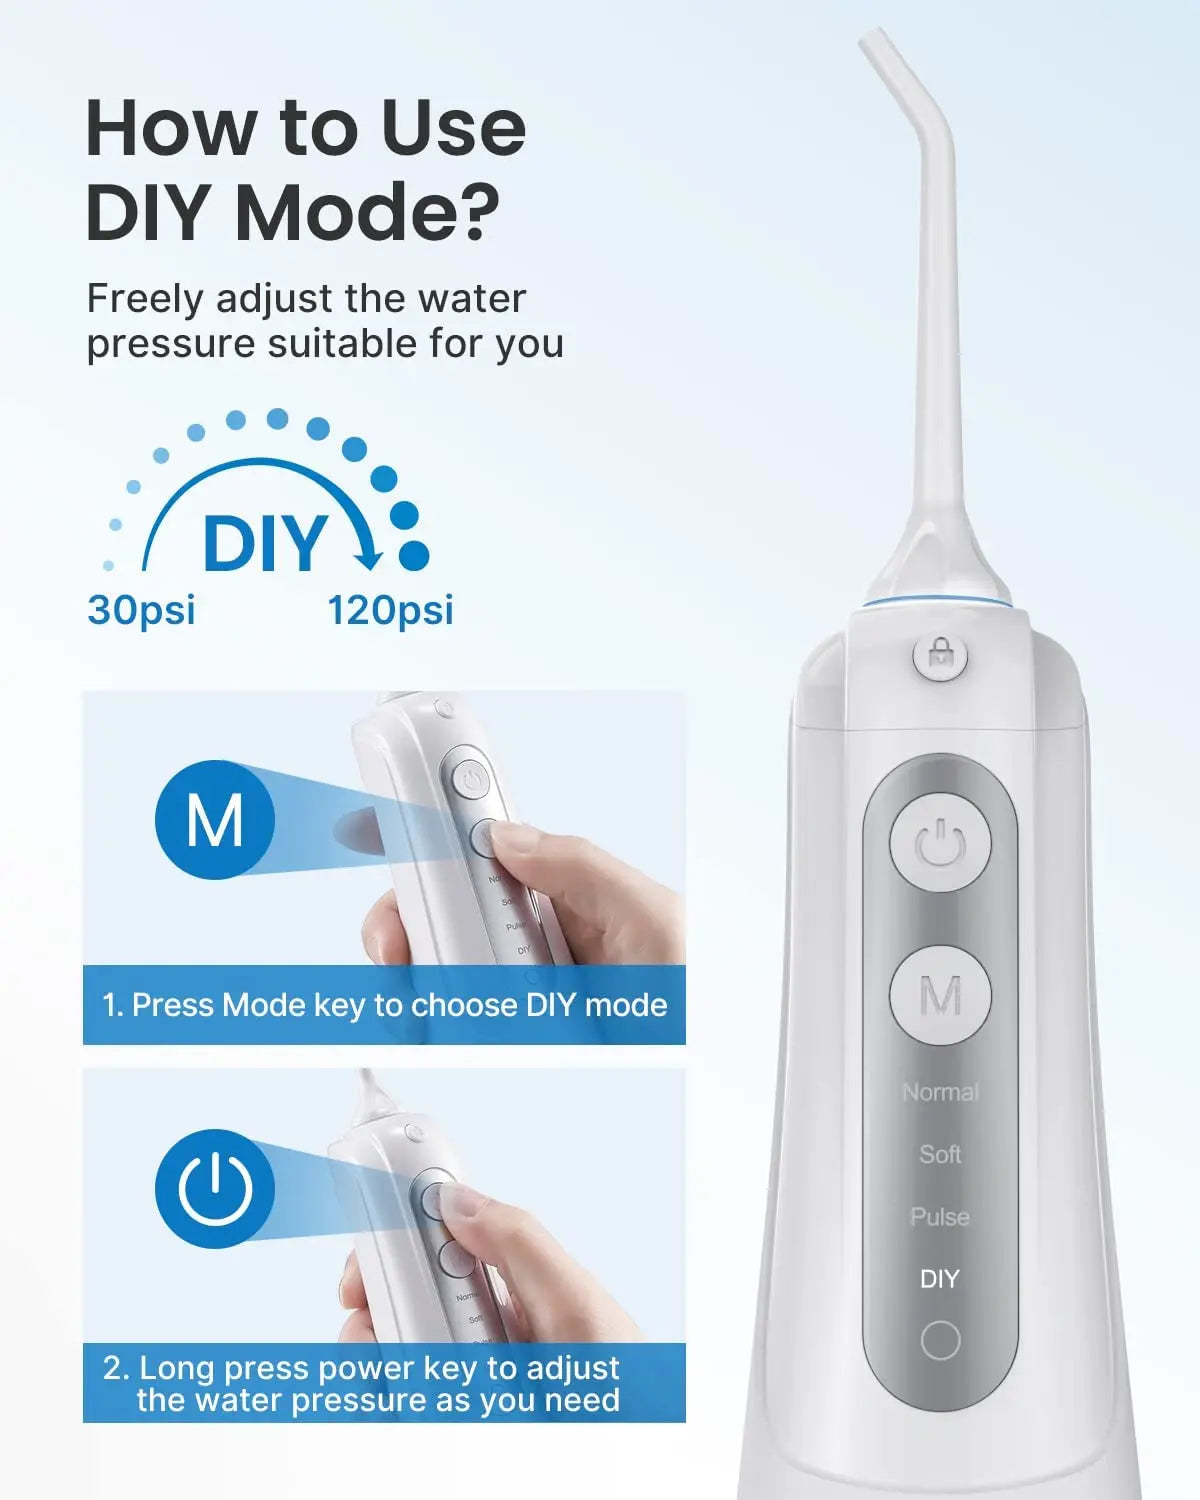 An instructional image for a Renpho EU Cordless Water Flosser with 360° rotating tips. It shows how to use the DIY mode to adjust the high pressure water jet. The device, featuring control buttons, is depicted next to explanatory text. Step 1: Press the Mode key to choose DIY mode. Step 2: Press the power key longer to adjust the water pressure.